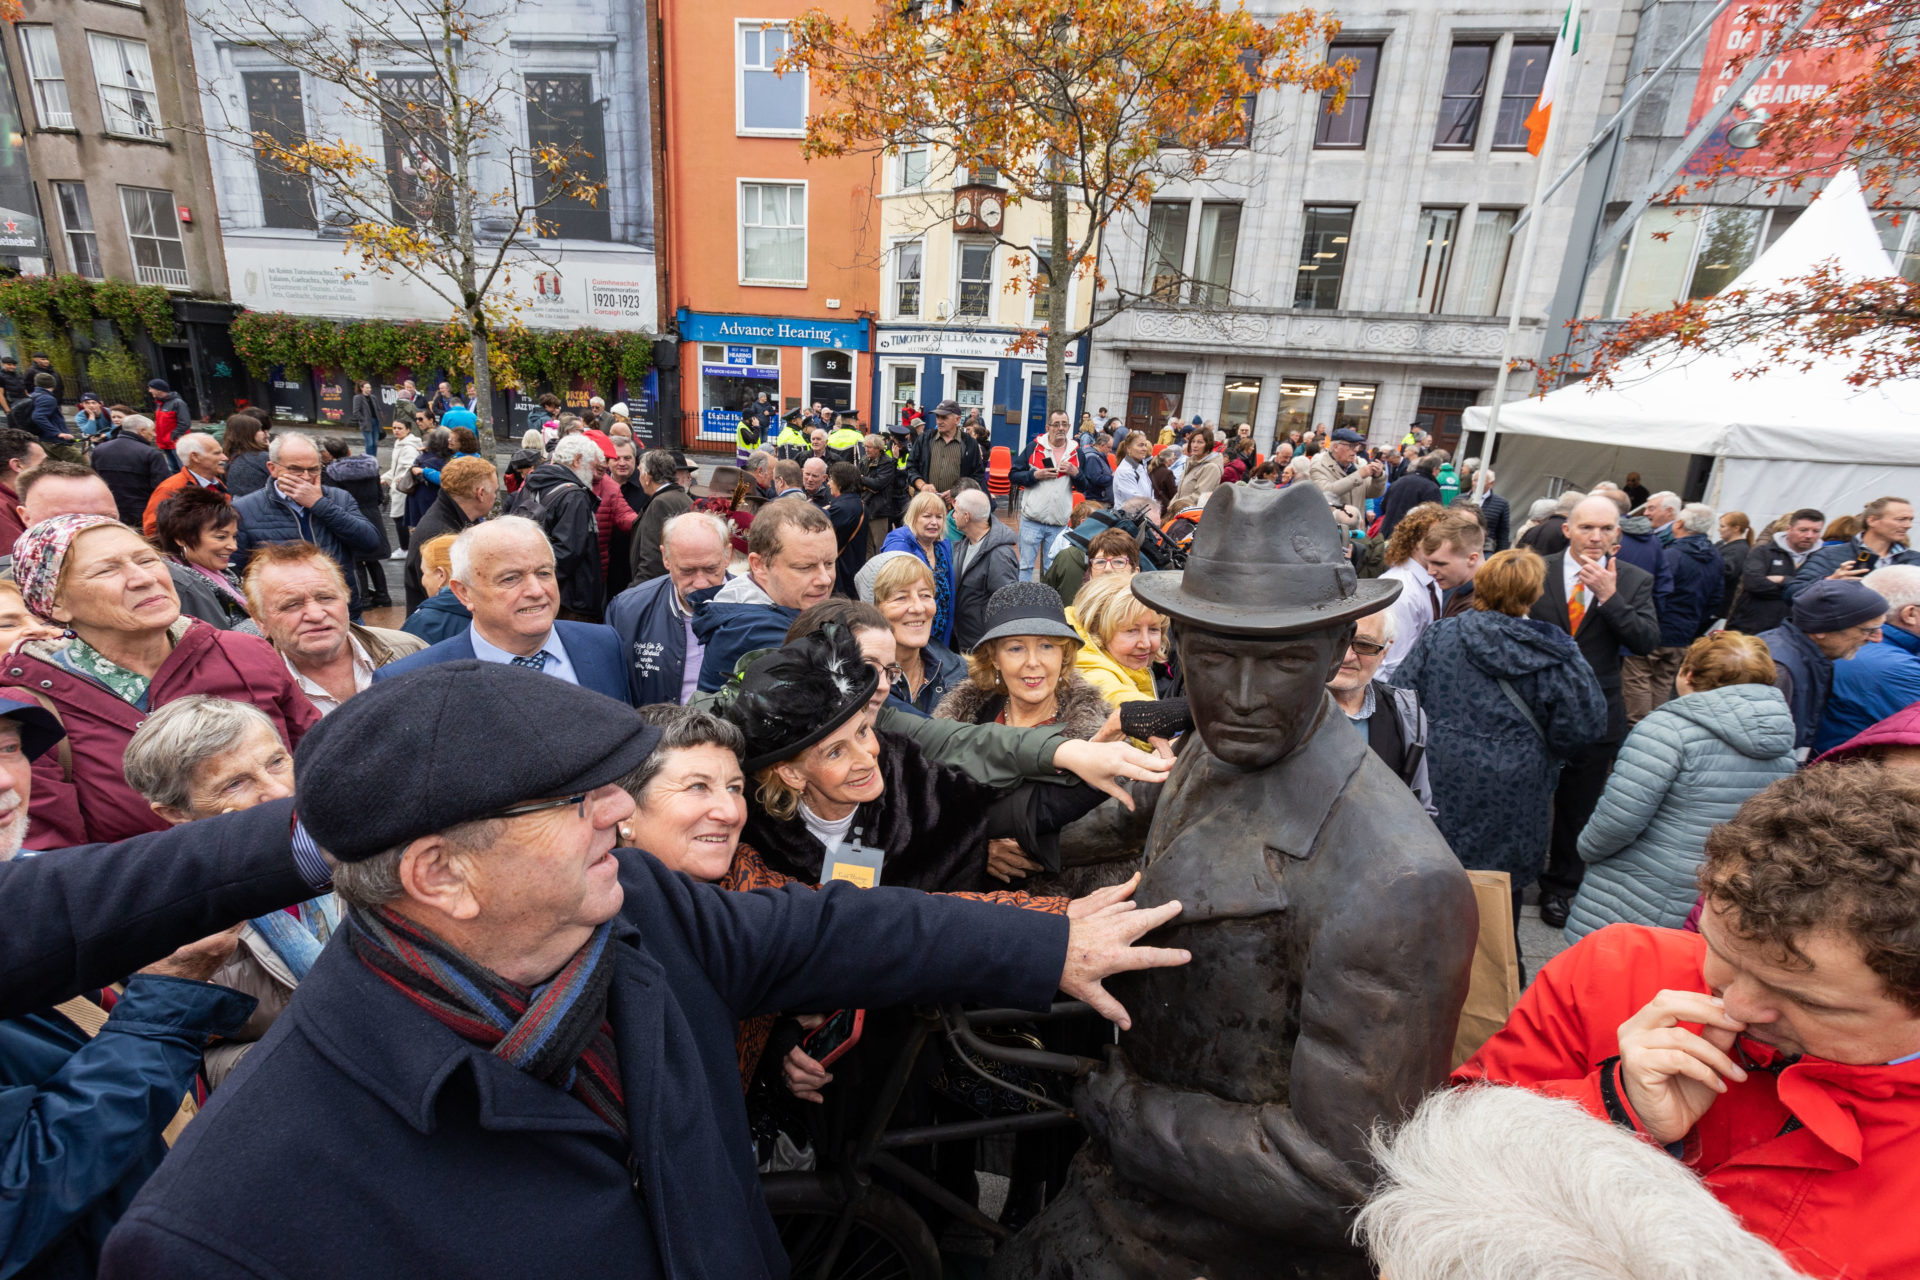 Hundreds of people turned out on the Grand Parade Cork City today for the reveal of a highly anticipated new statue of Michael Collins